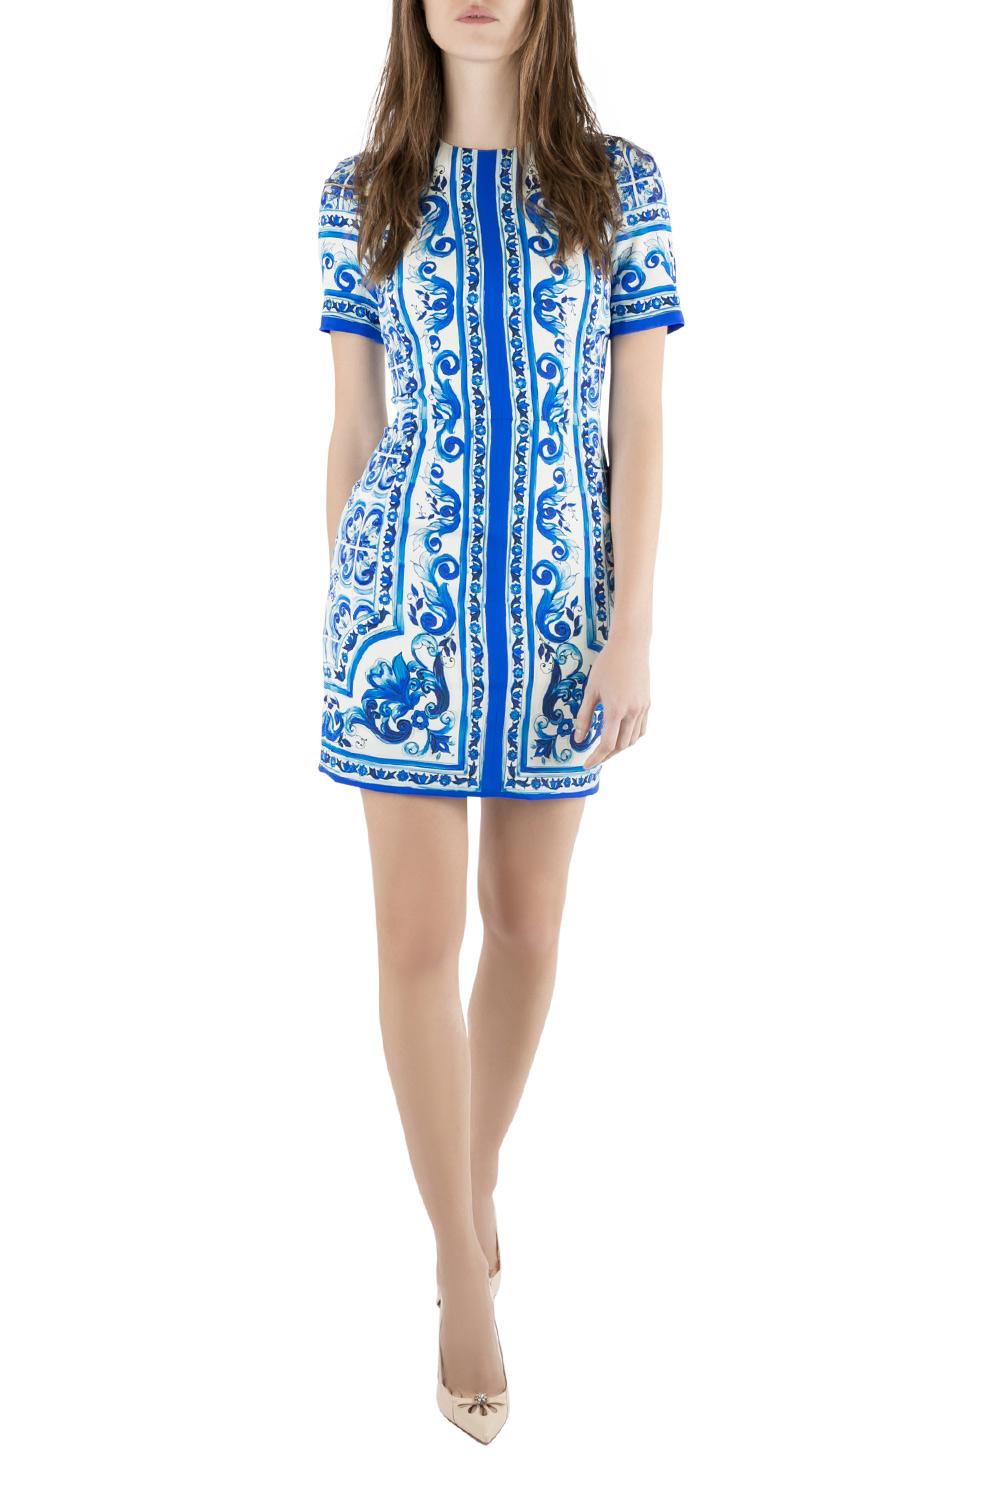 Tailored from a smooth silk blend, this fitted sheath dress is perfect for a day out or even for an evening event. The gorgeous Dolce & Gabbana creation is designed with majolica print in a combination of blue and white color. Team it with kitten